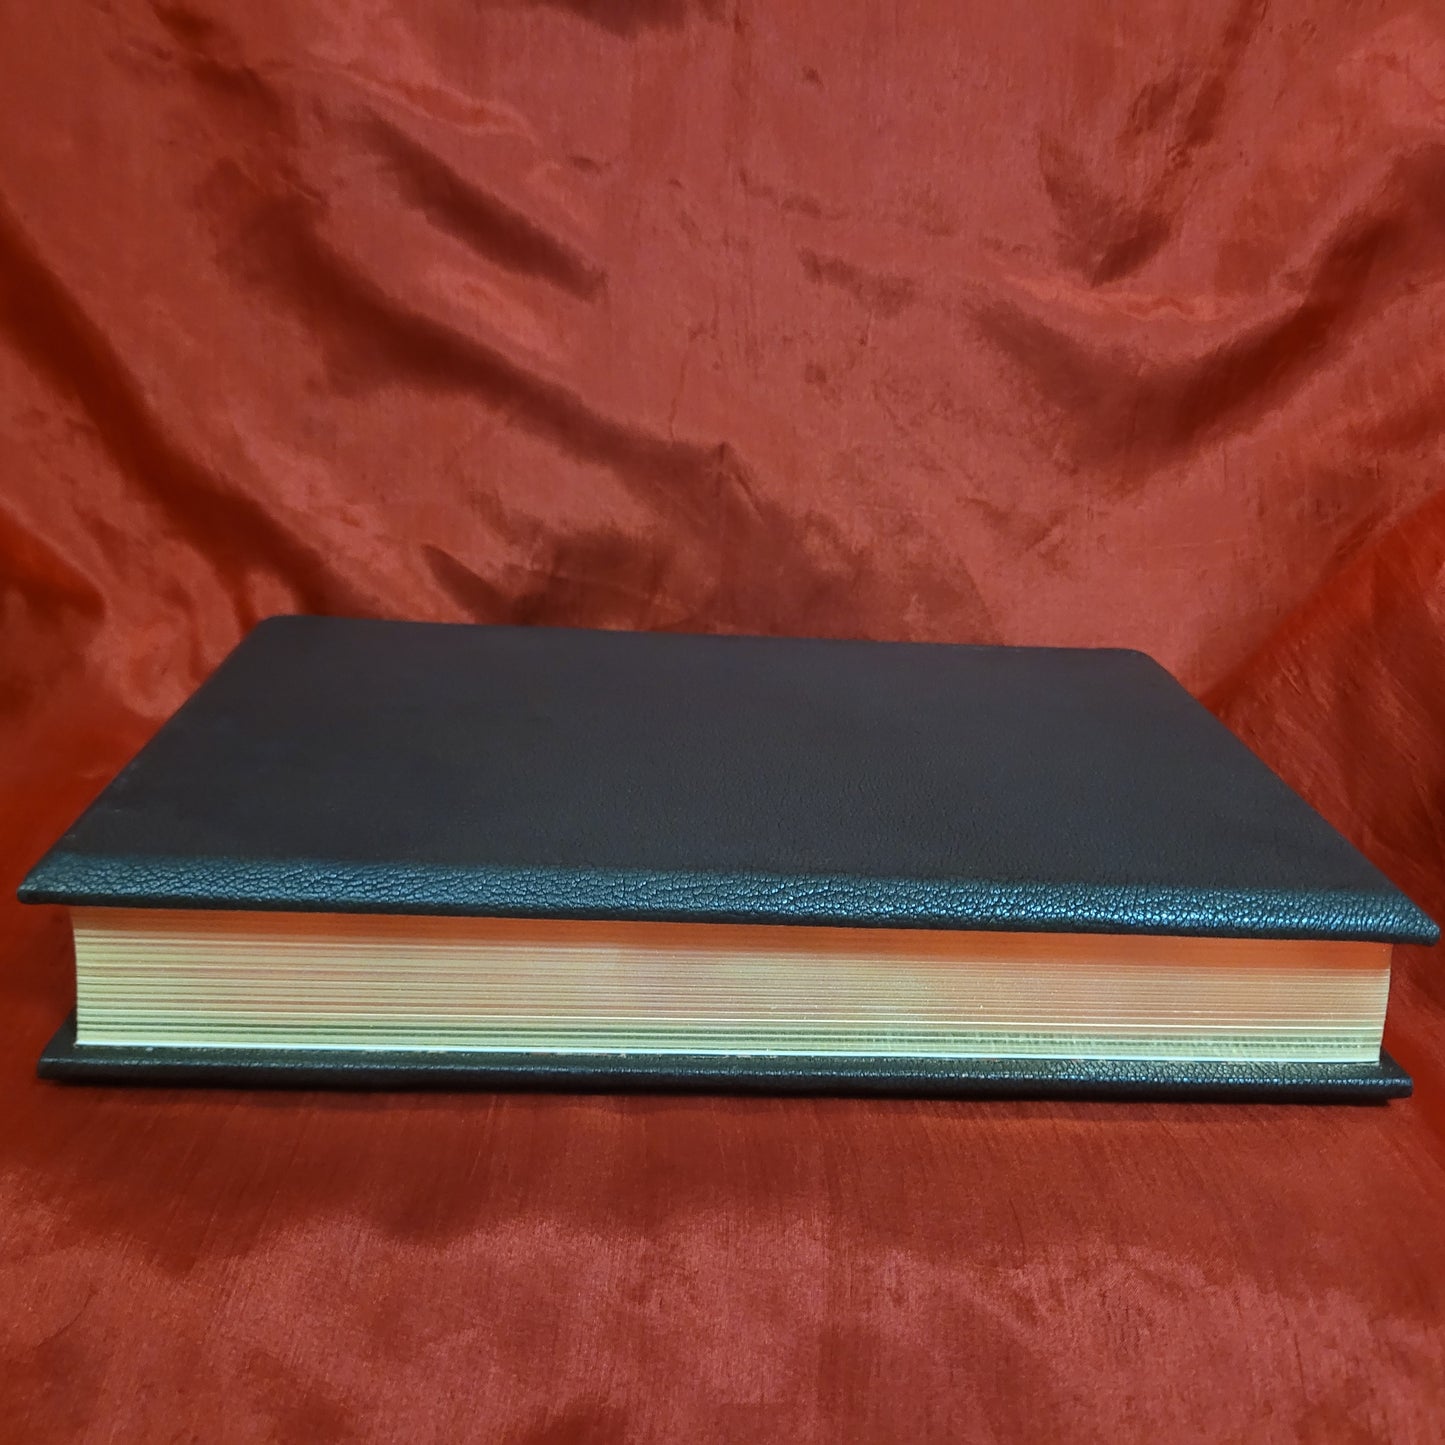 The True Grimoire: Encyclopedia Goetica Volume I by Jake Stratton-Kent (Scarlet Imprint, 2022) Fine Edition Bound in Goatskin Limited to 72 Copies